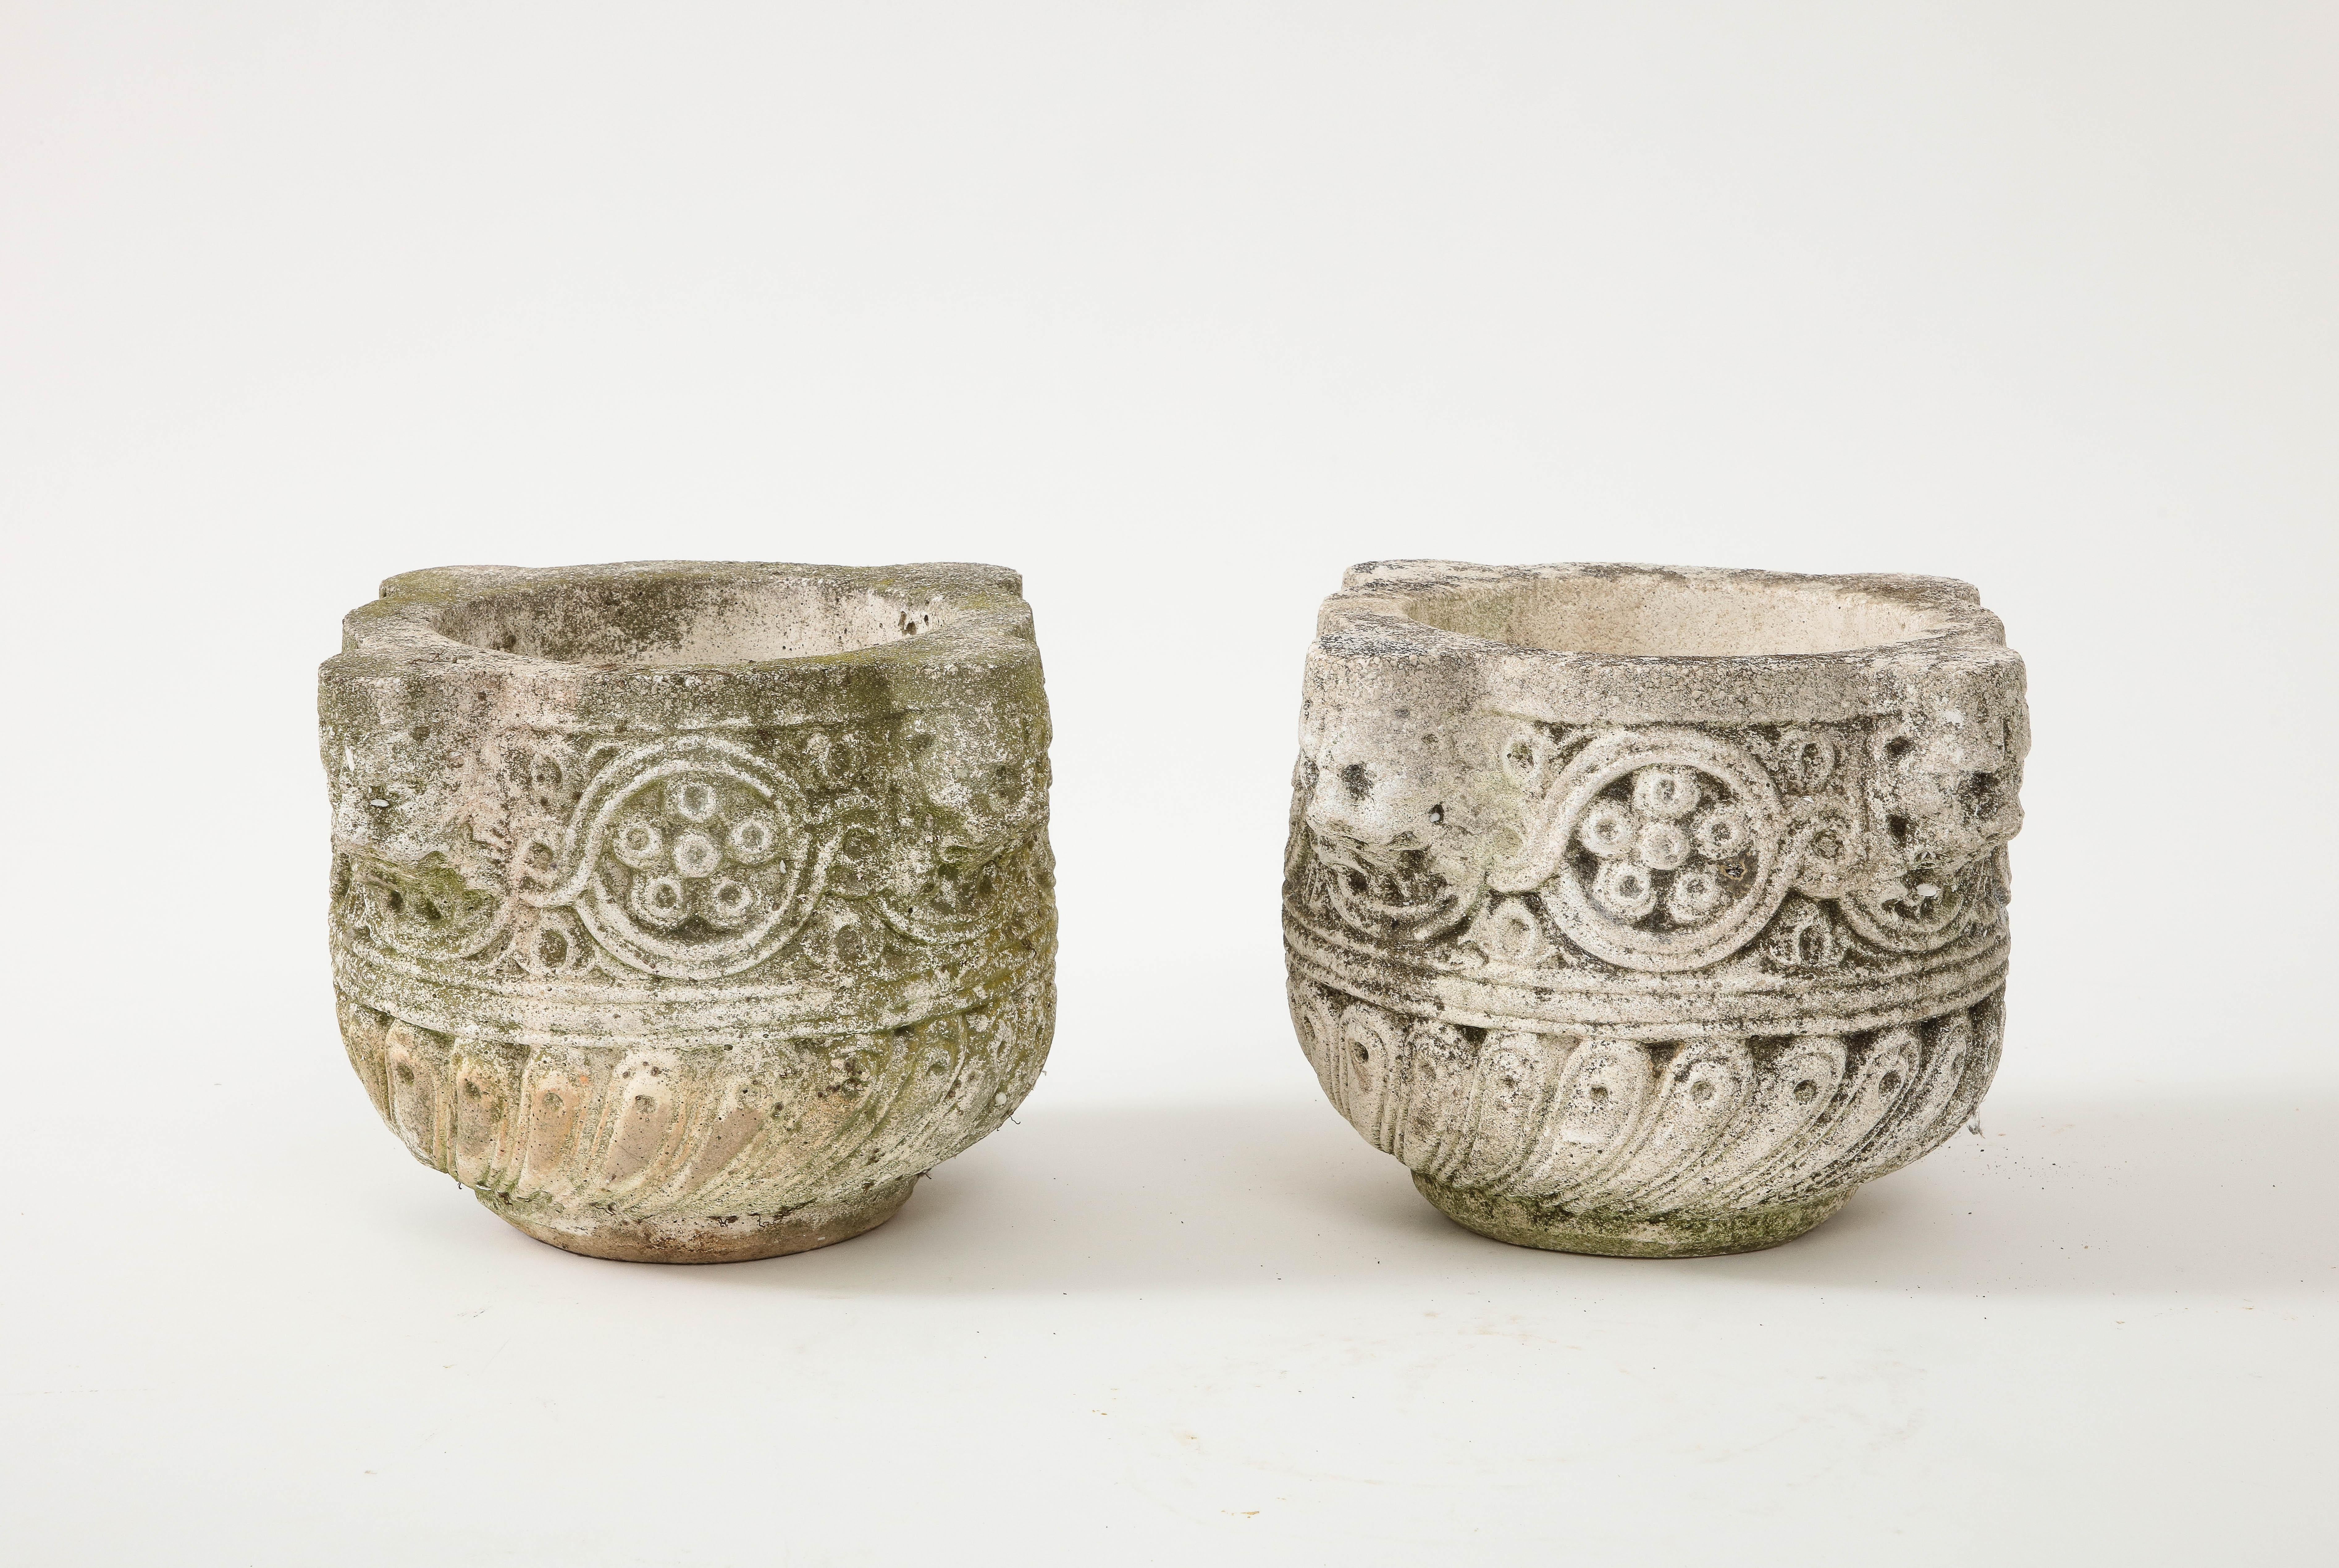 A pair of Italian eighteenth century hand-carved stone vases or jardinières with wonderful lion heads, scrolls and carved rosettes.   These vases have a natural patina from years of staying outside. Vases can be used inside or out, with or without